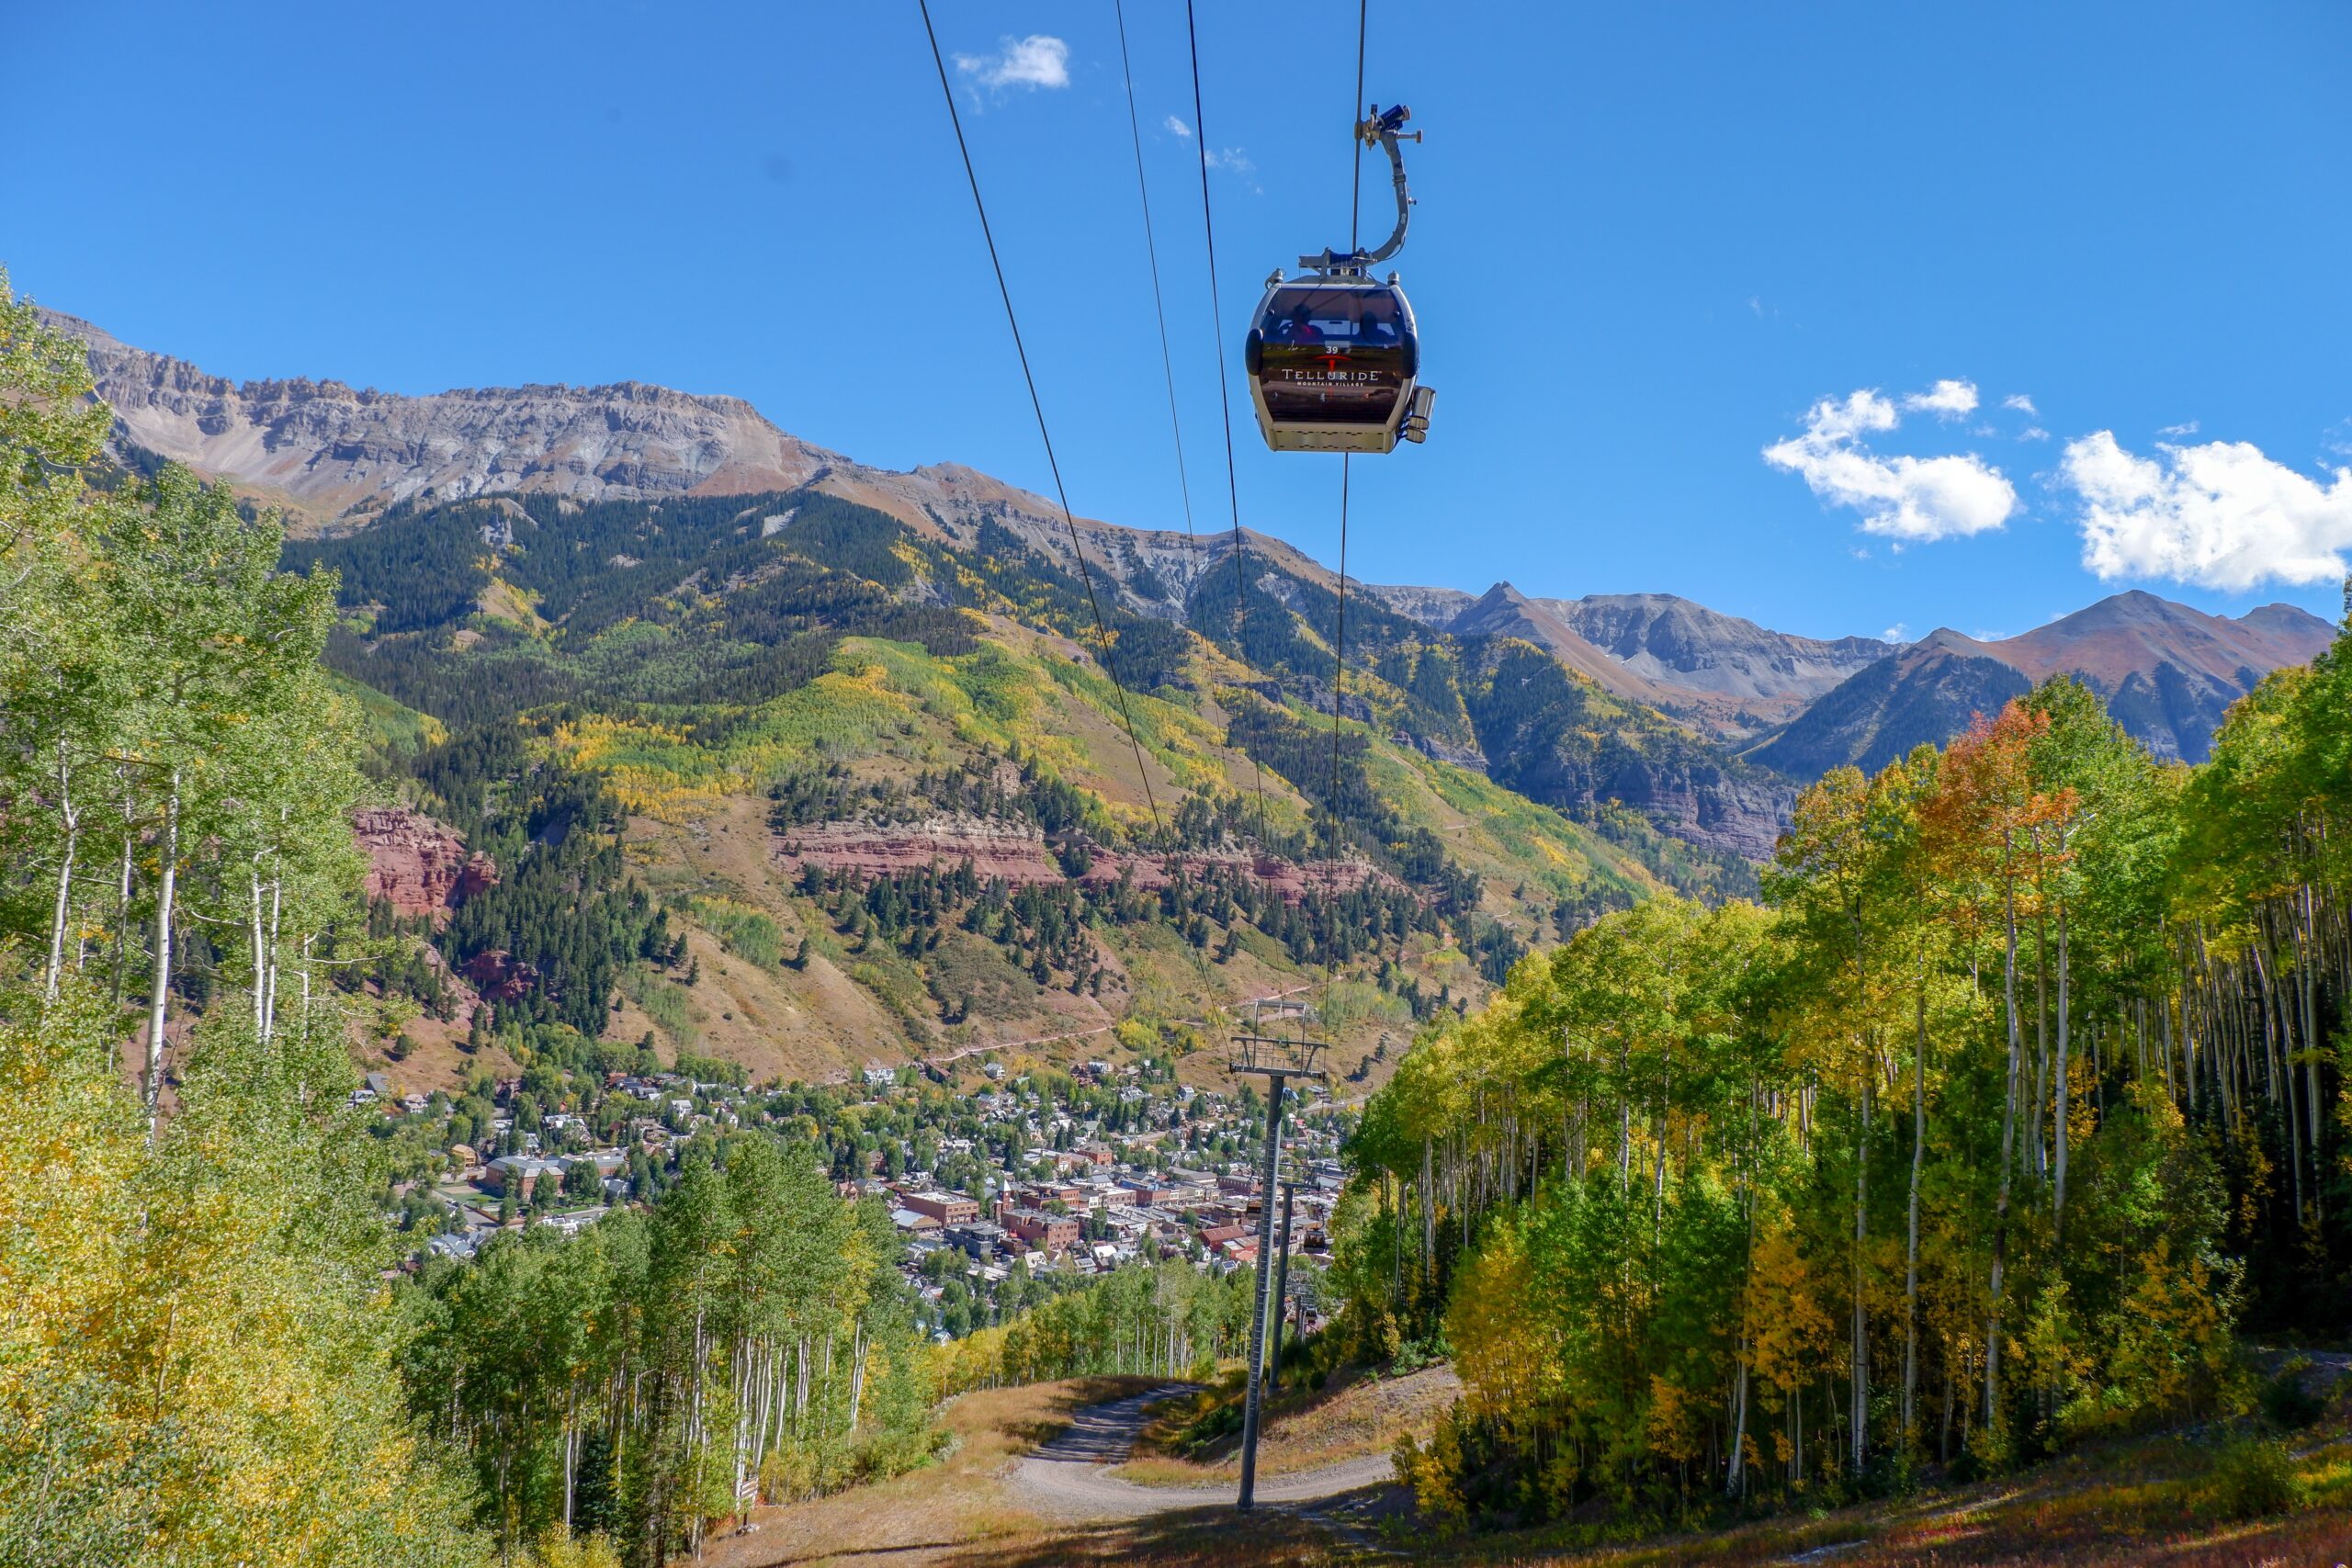 The Best Hotel At Telluride In Colorado